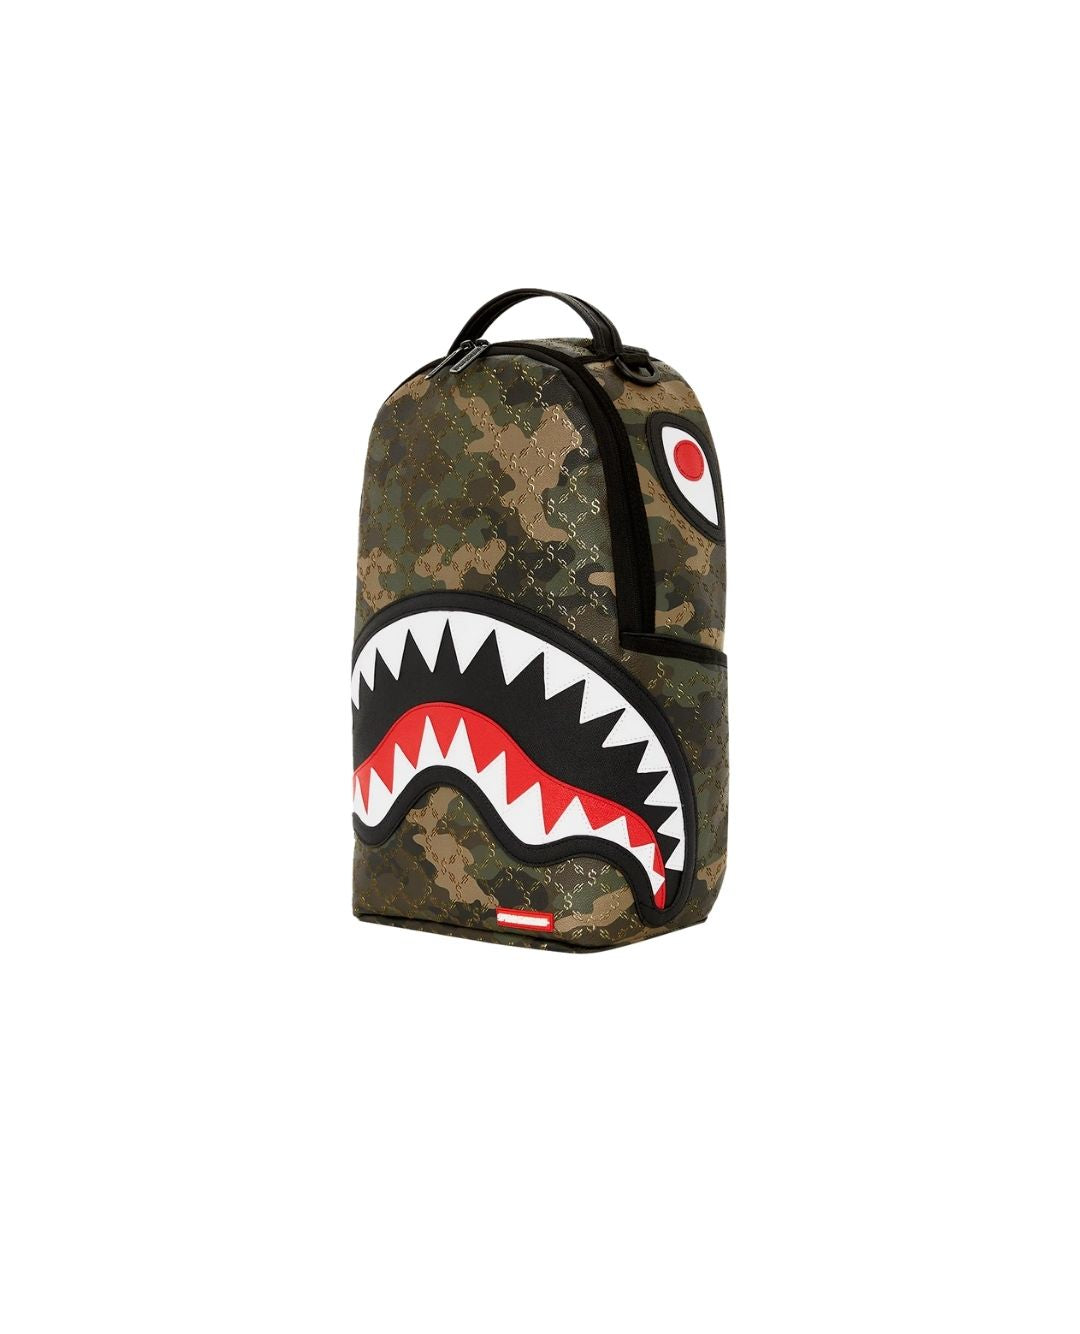 PATTERN OVER CAMO BACKPACK